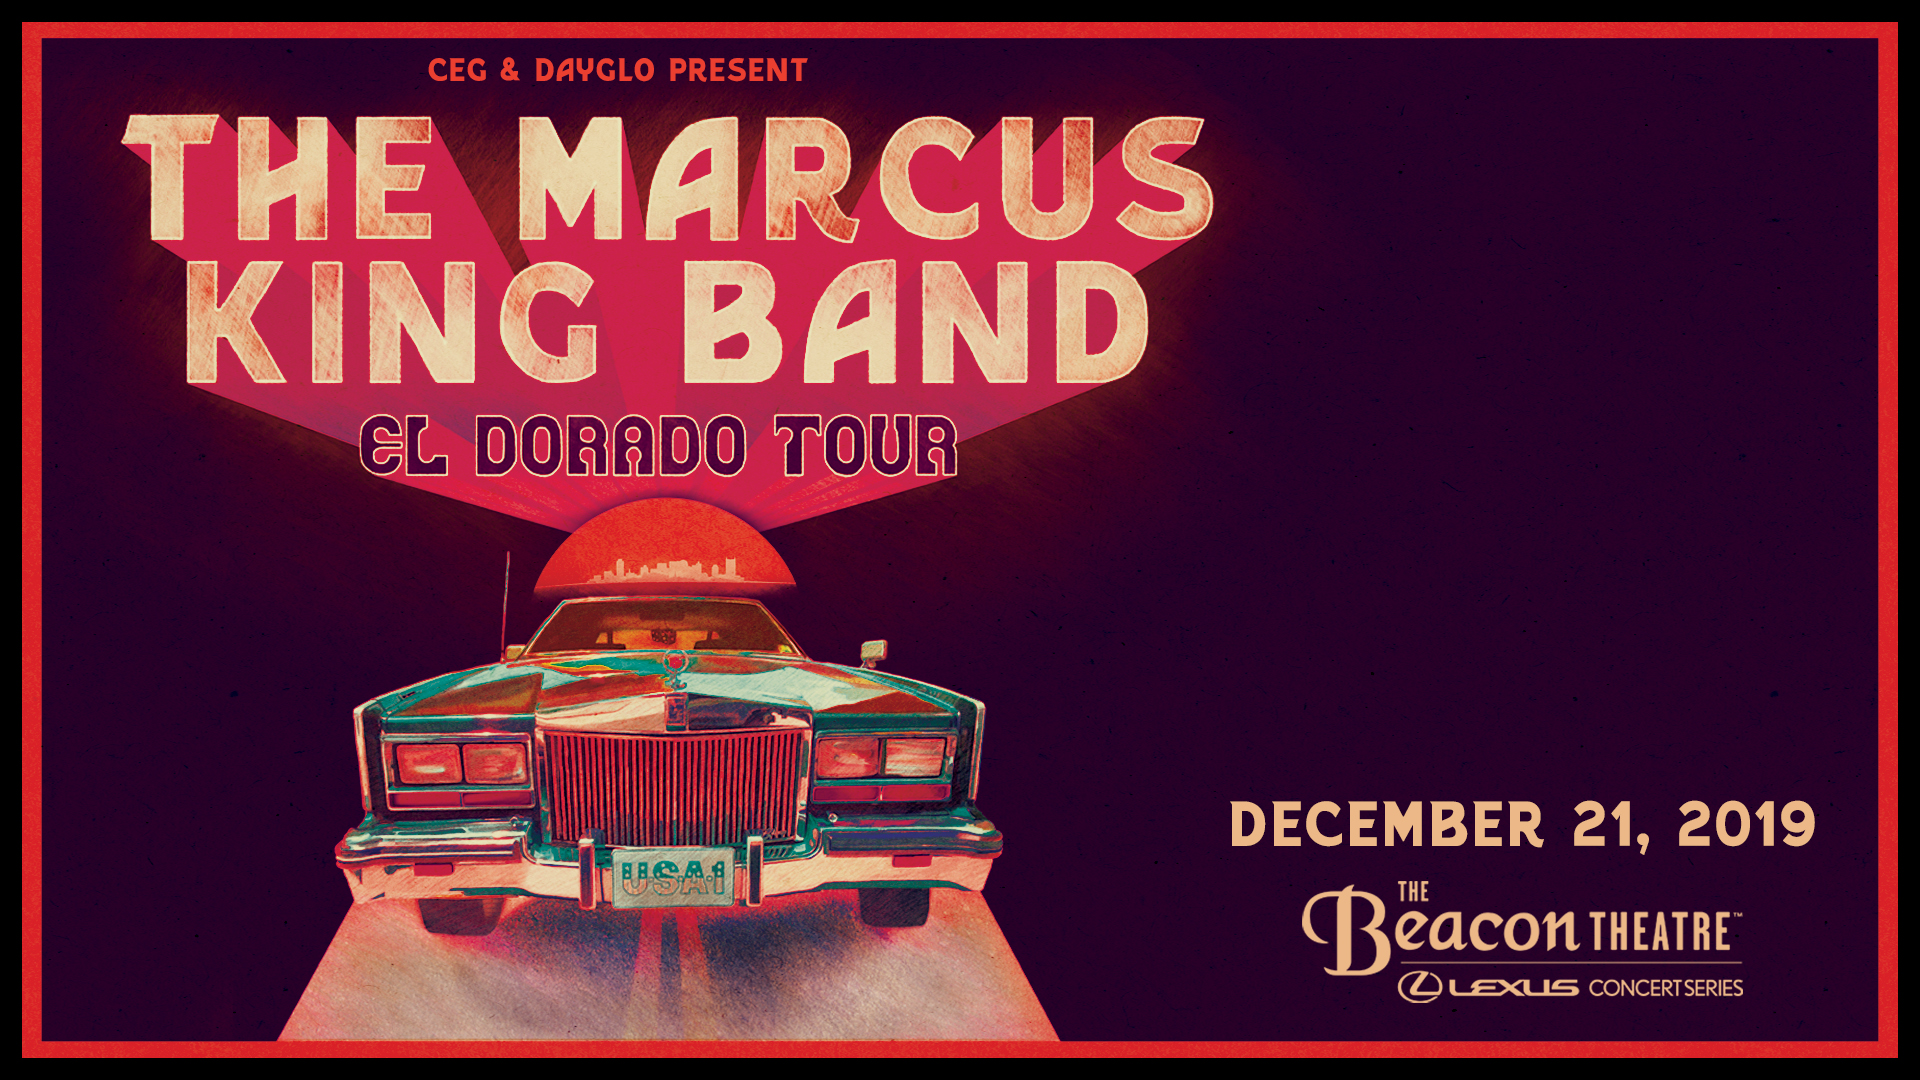 The Marcus King Band Announce Winter Dates, Including Beacon Theater